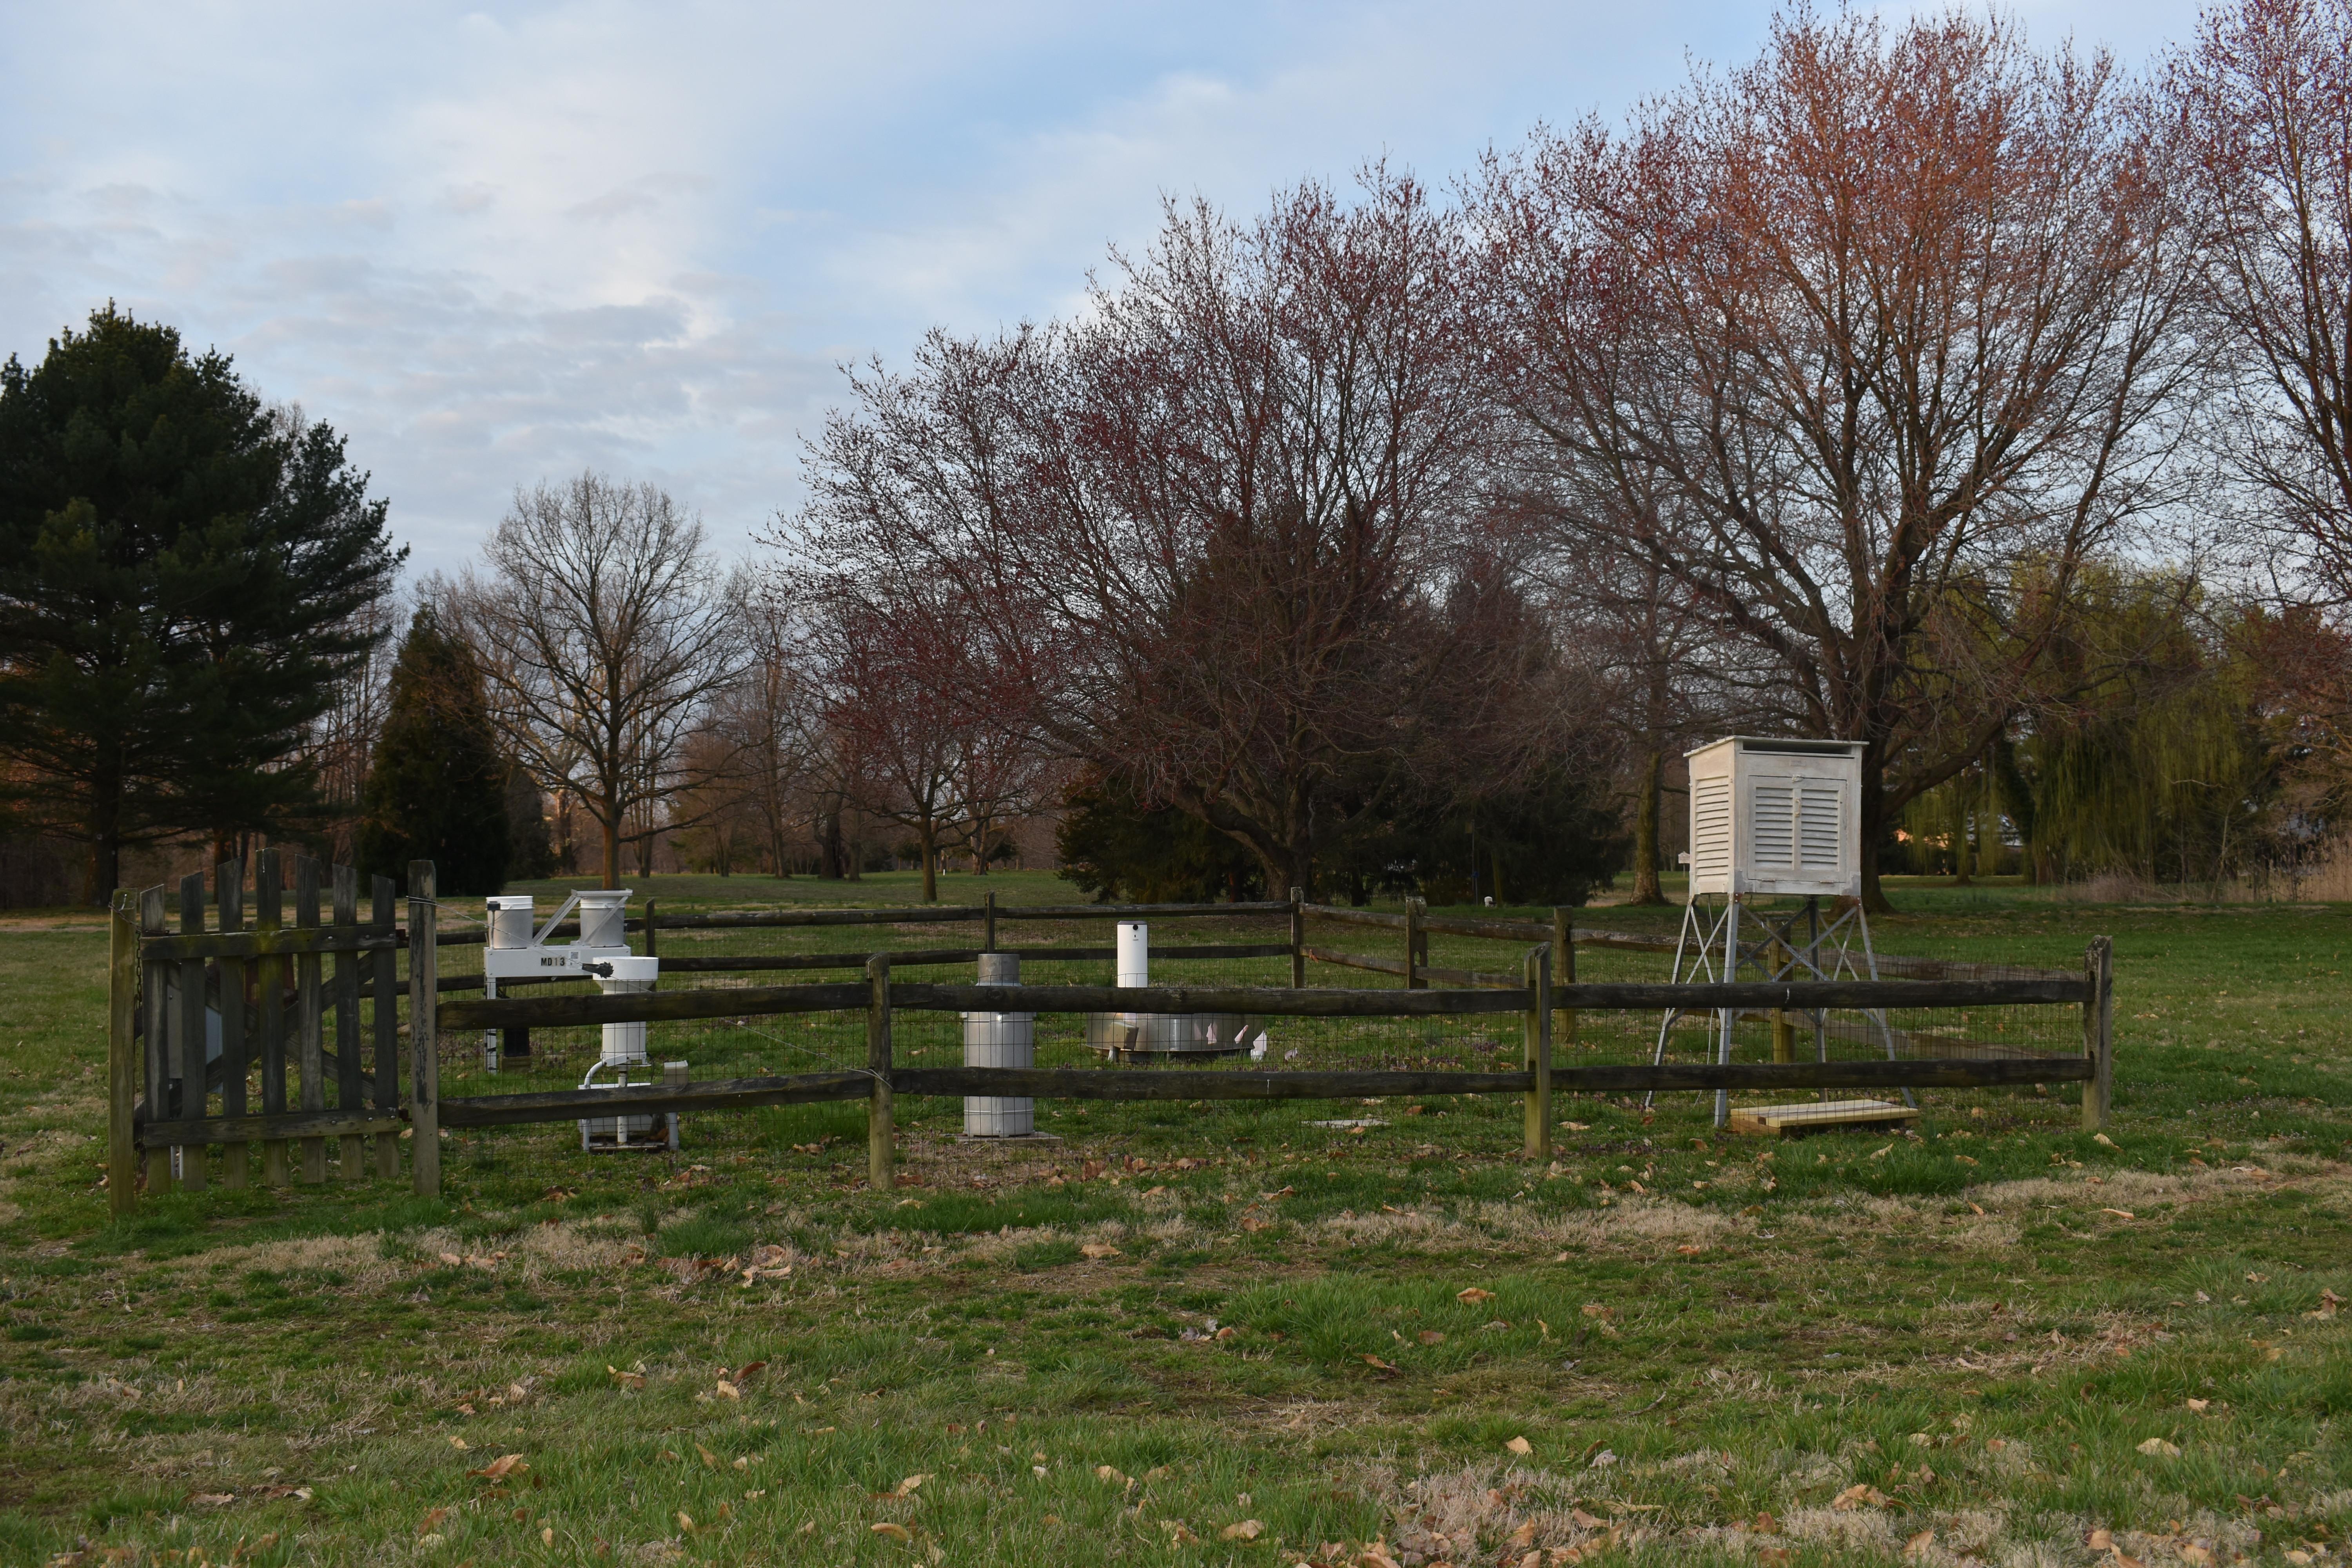 Wye weather station in Spring